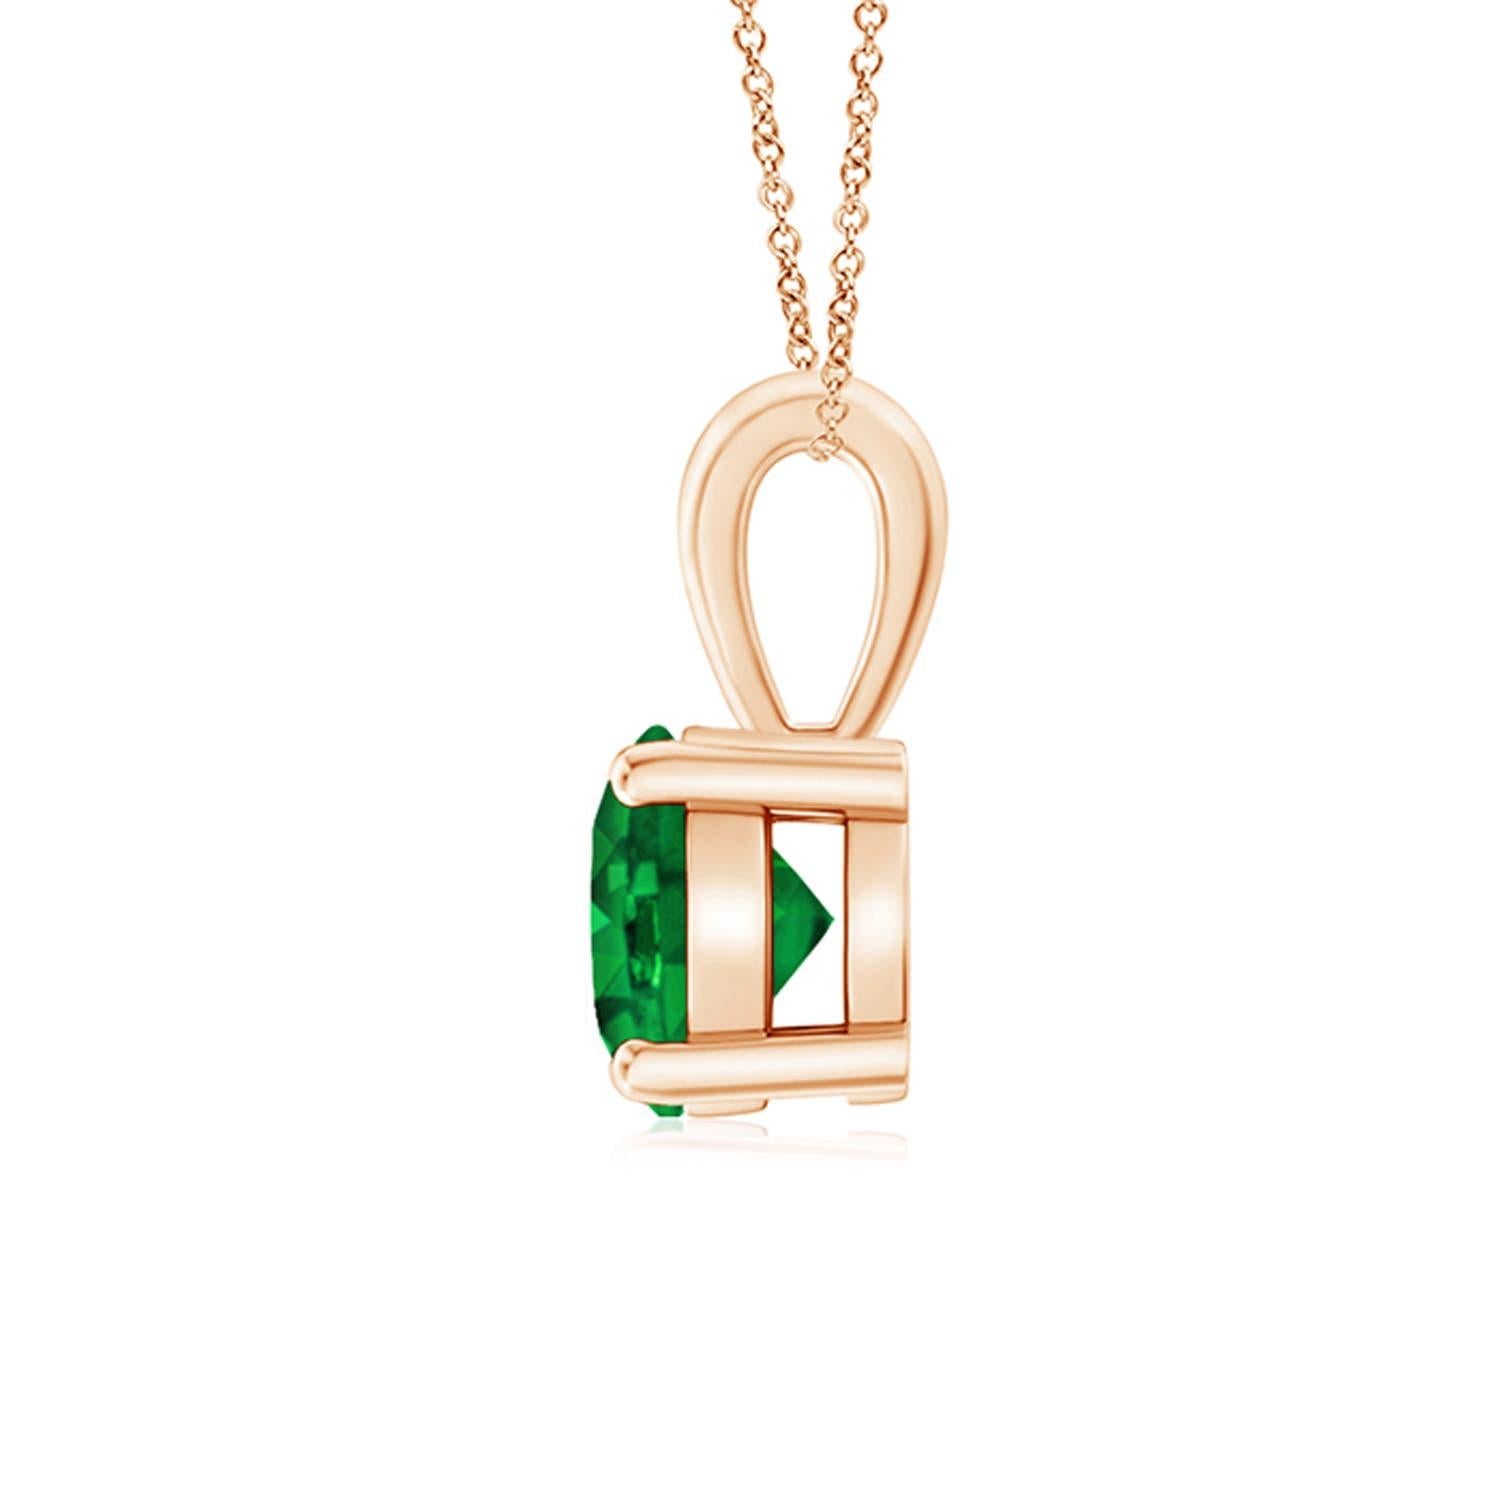 Linked to a lustrous bale is a lush green emerald solitaire secured in a four prong setting. Crafted in 14k rose gold, the elegant design of this classic emerald pendant draws all attention towards the magnificence of the center stone.
Emerald is